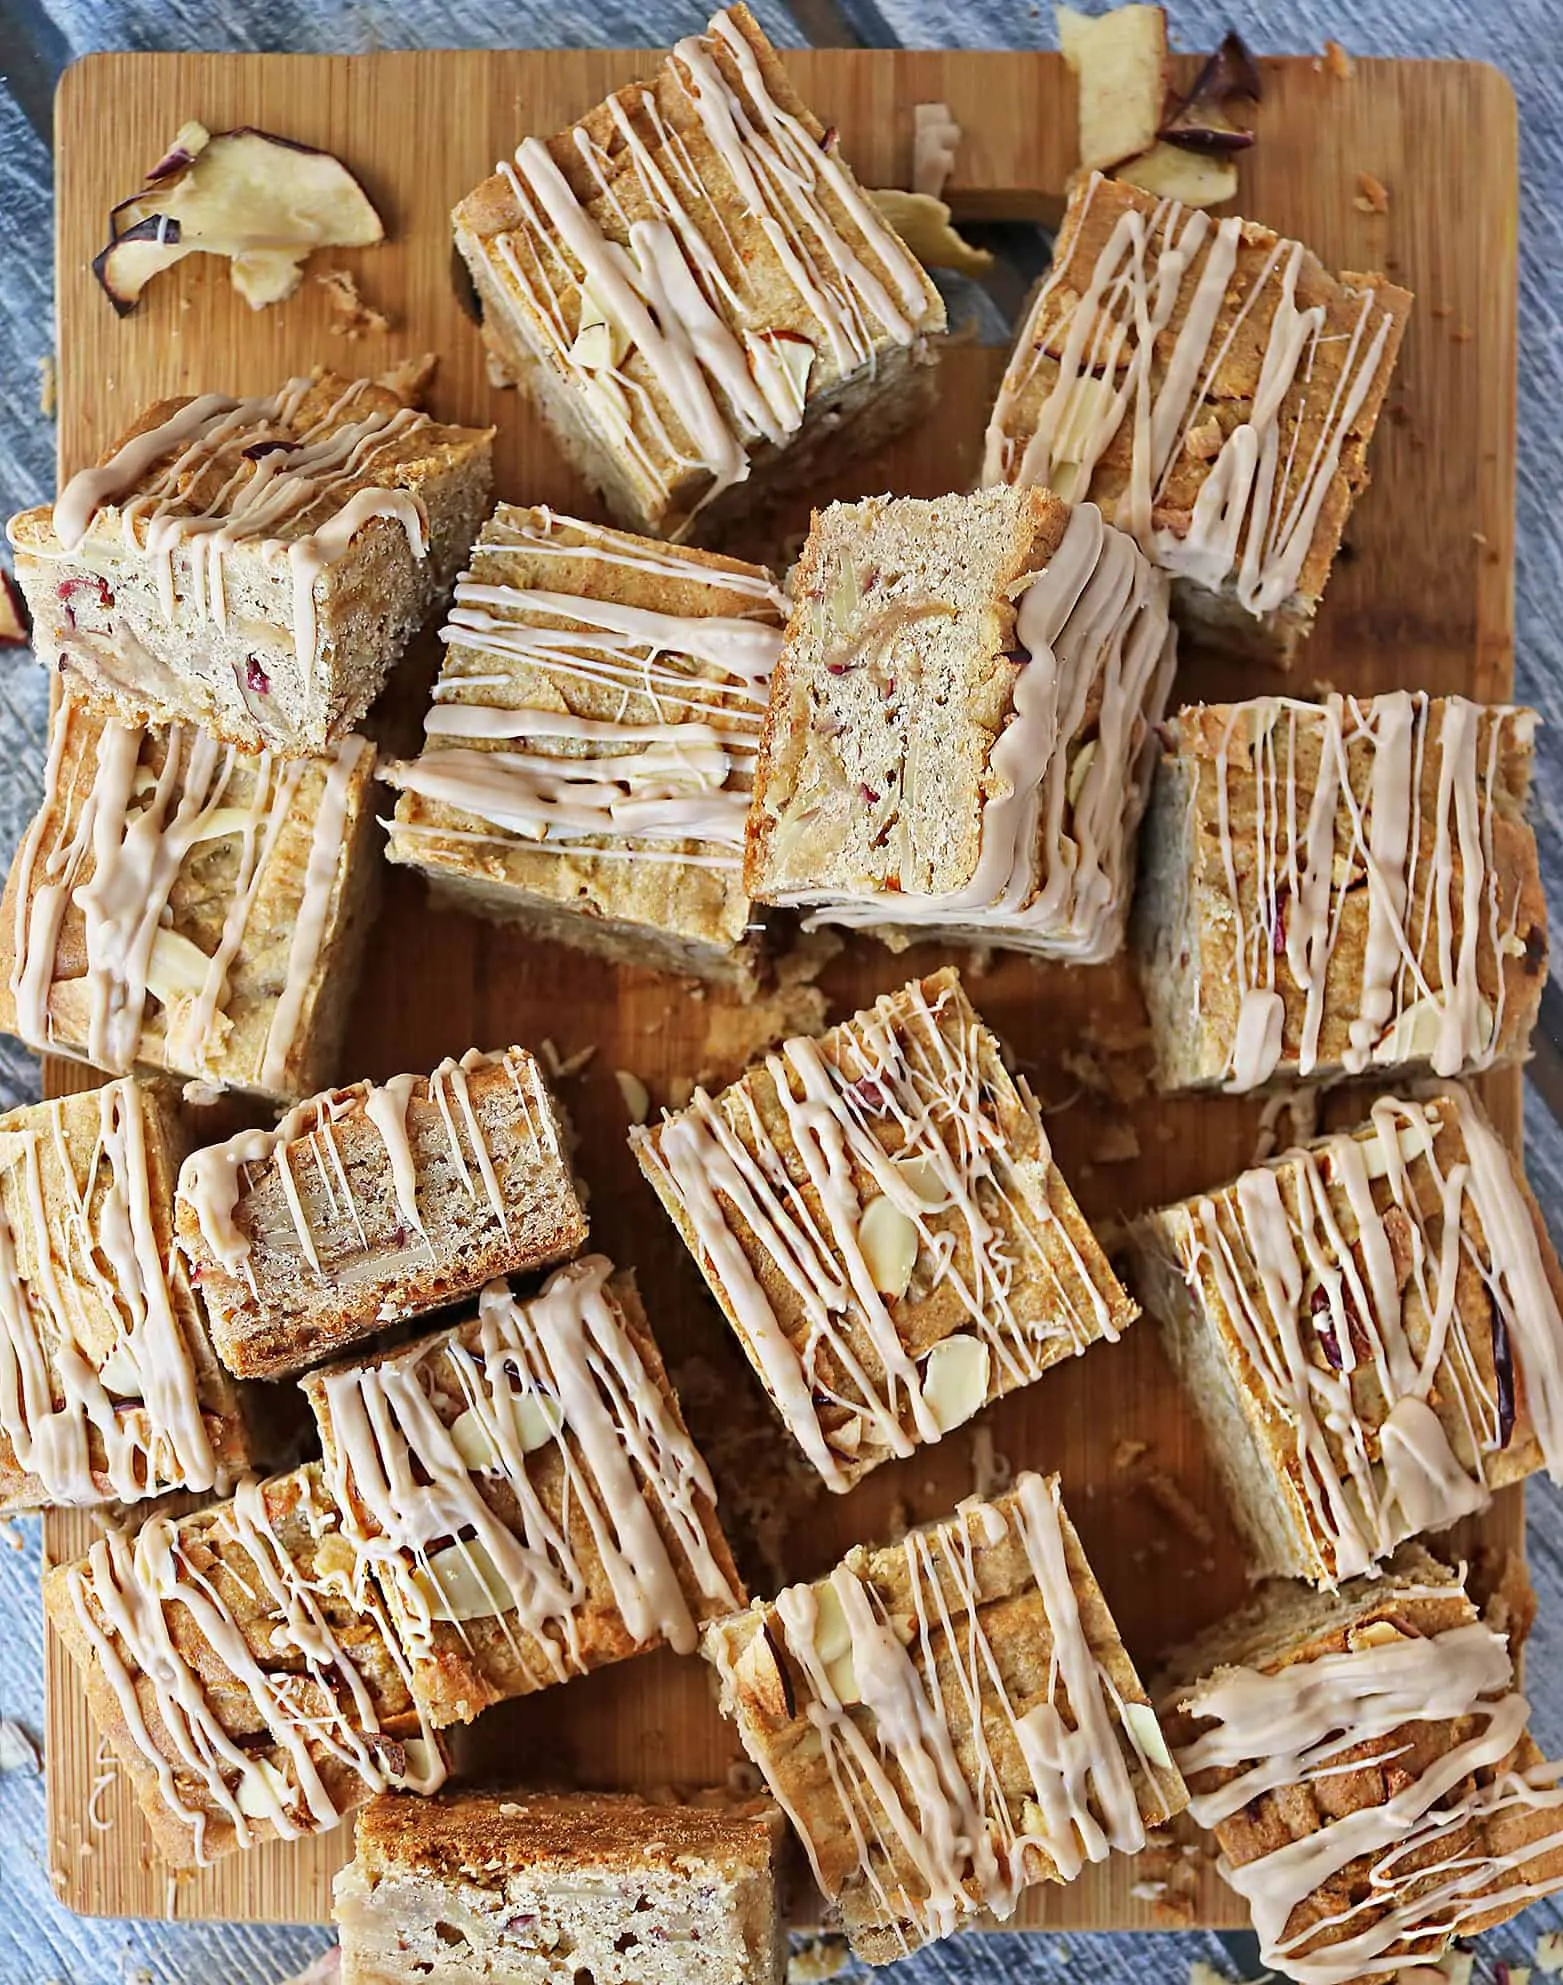 Easy, Gluten Free Apple Almond Bars With Caramel Drizzle